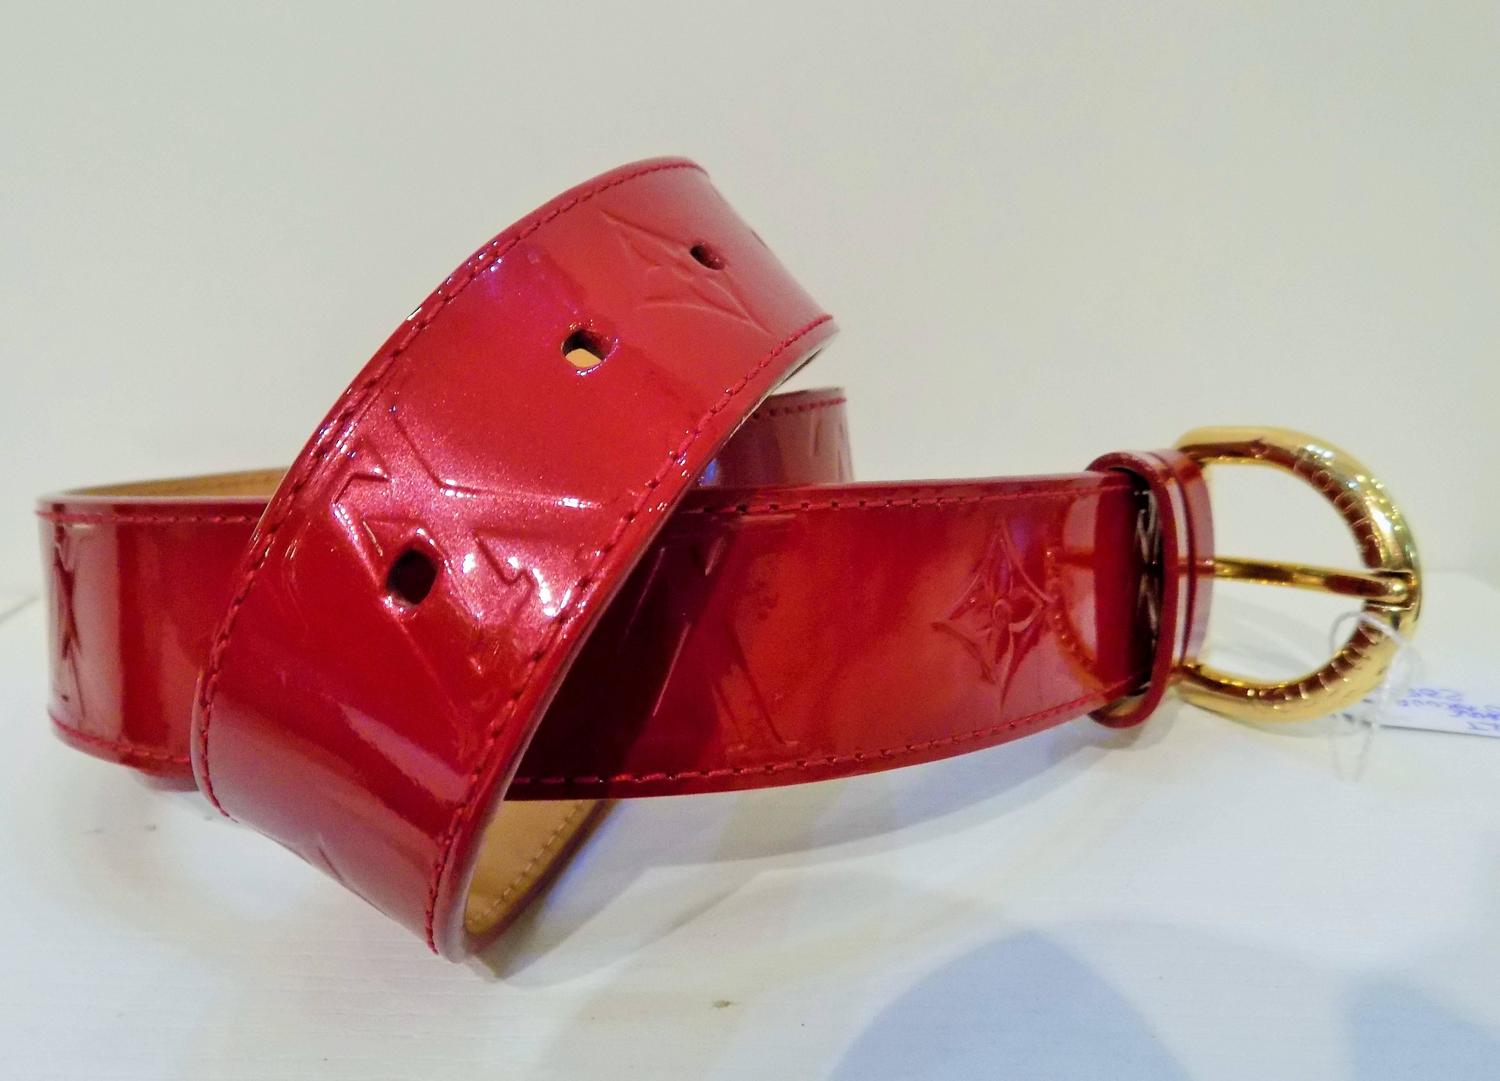 Louis Vuitton Red Belt For Sale at 1stdibs